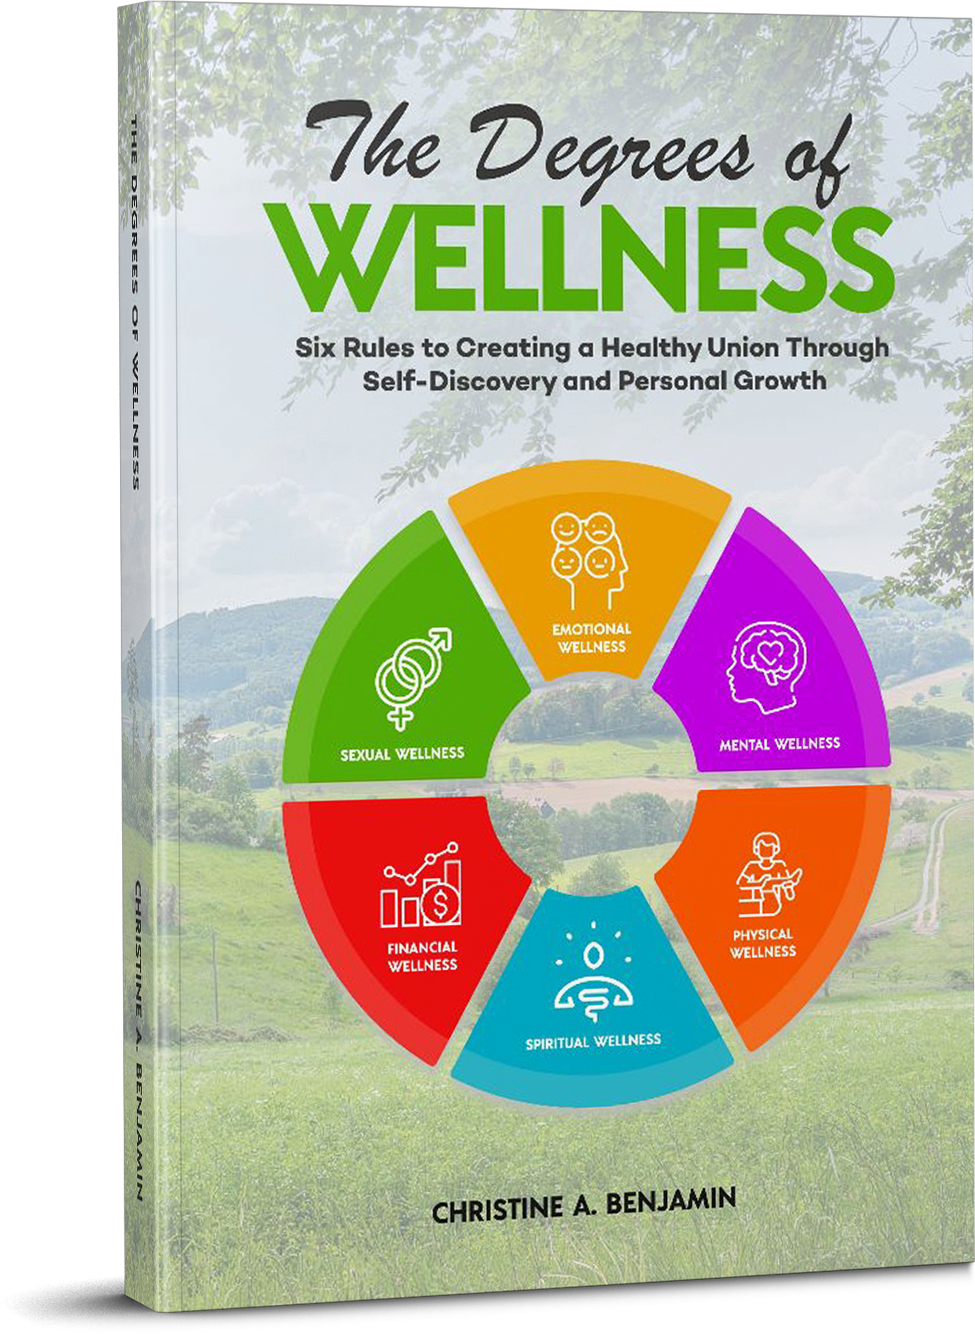 The Degrees of Wellness Book by Christine Benjamin